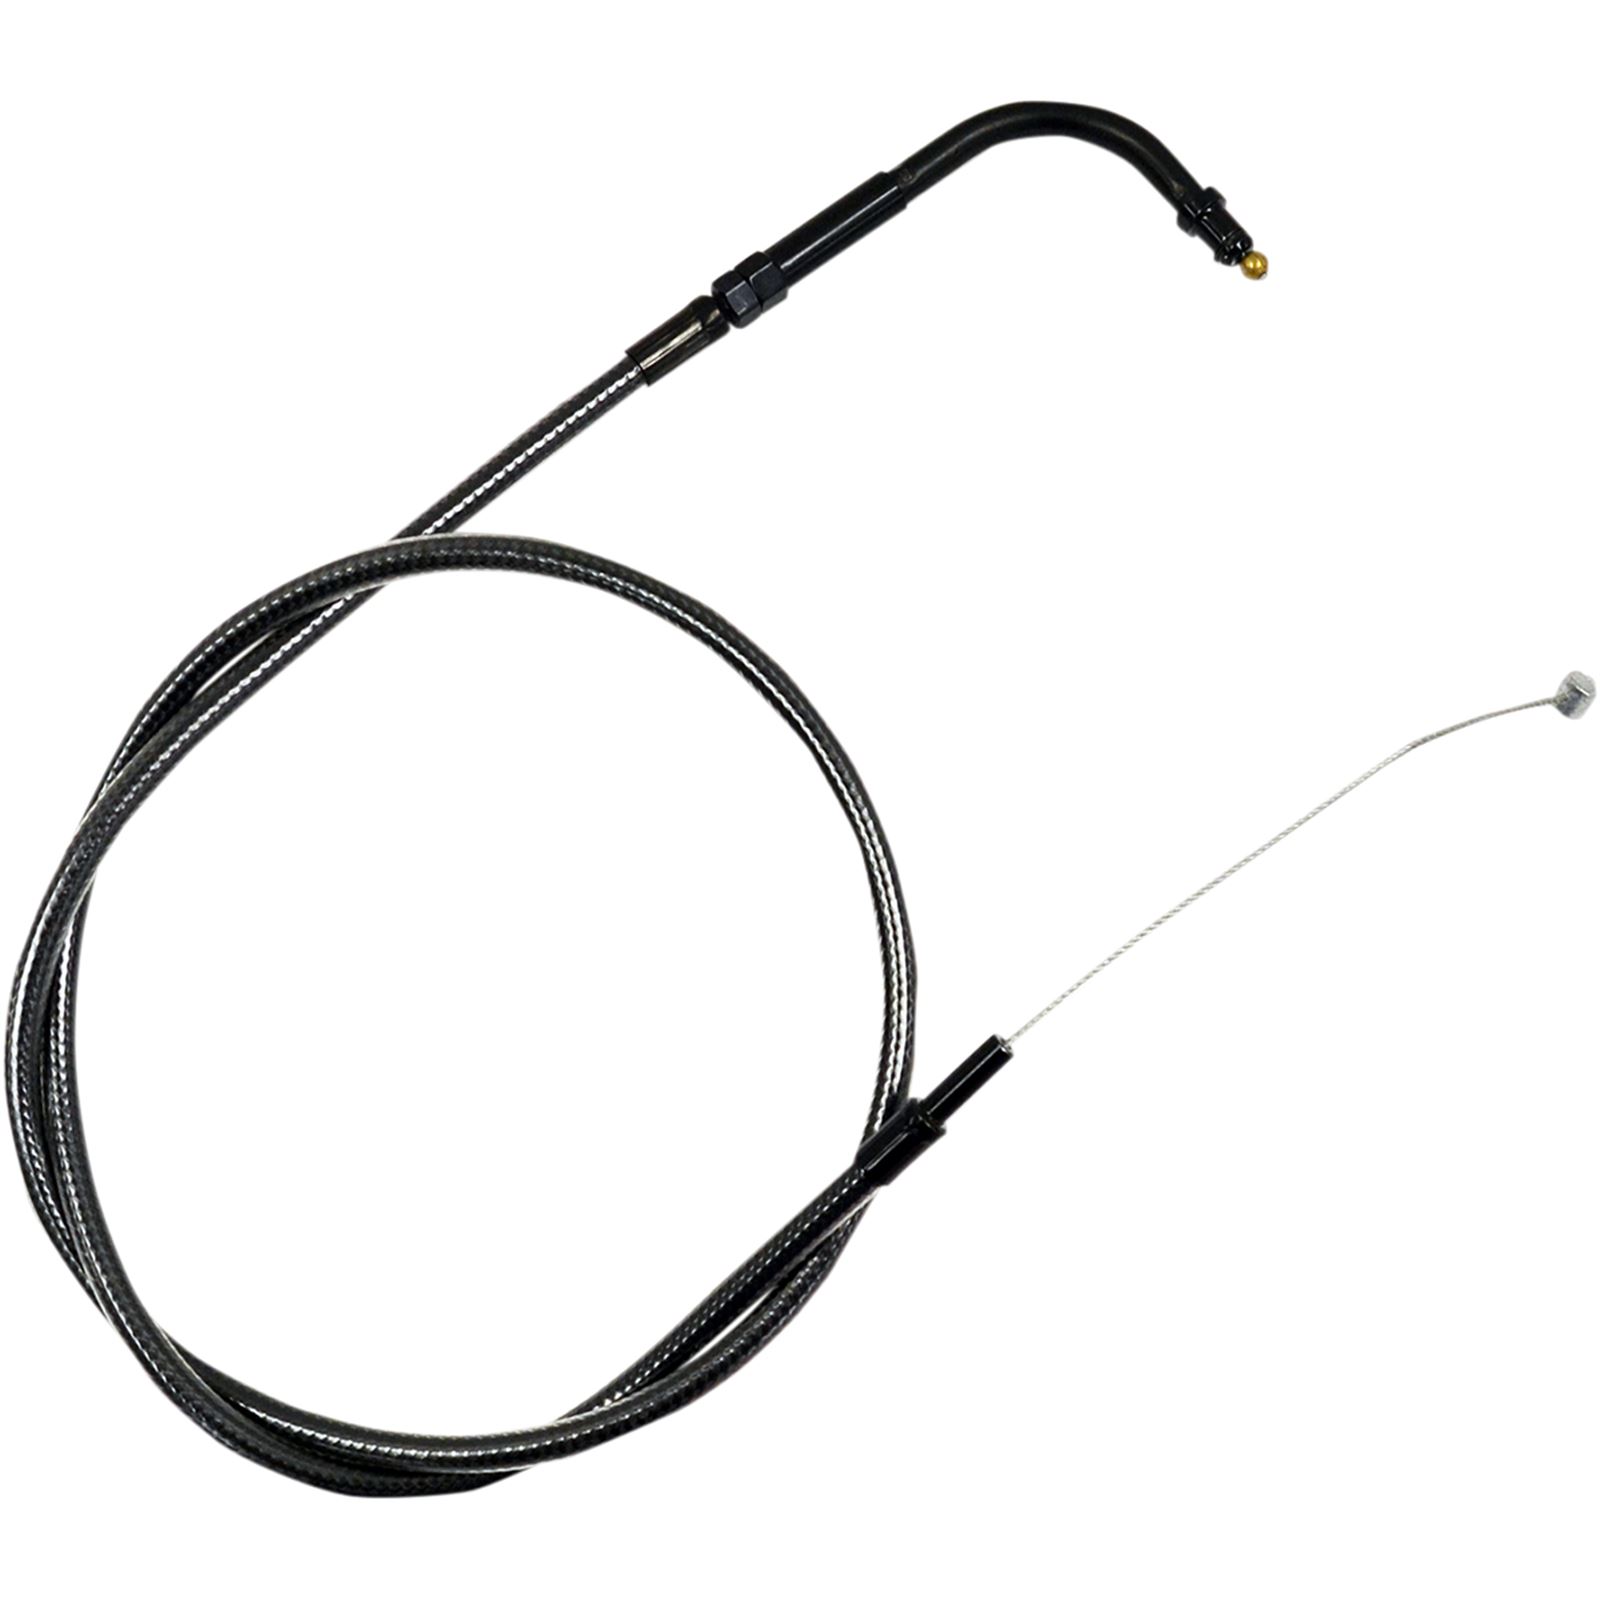 LA Choppers 18" - 20" Midnight Throttle Cable for '96 - '07 FL